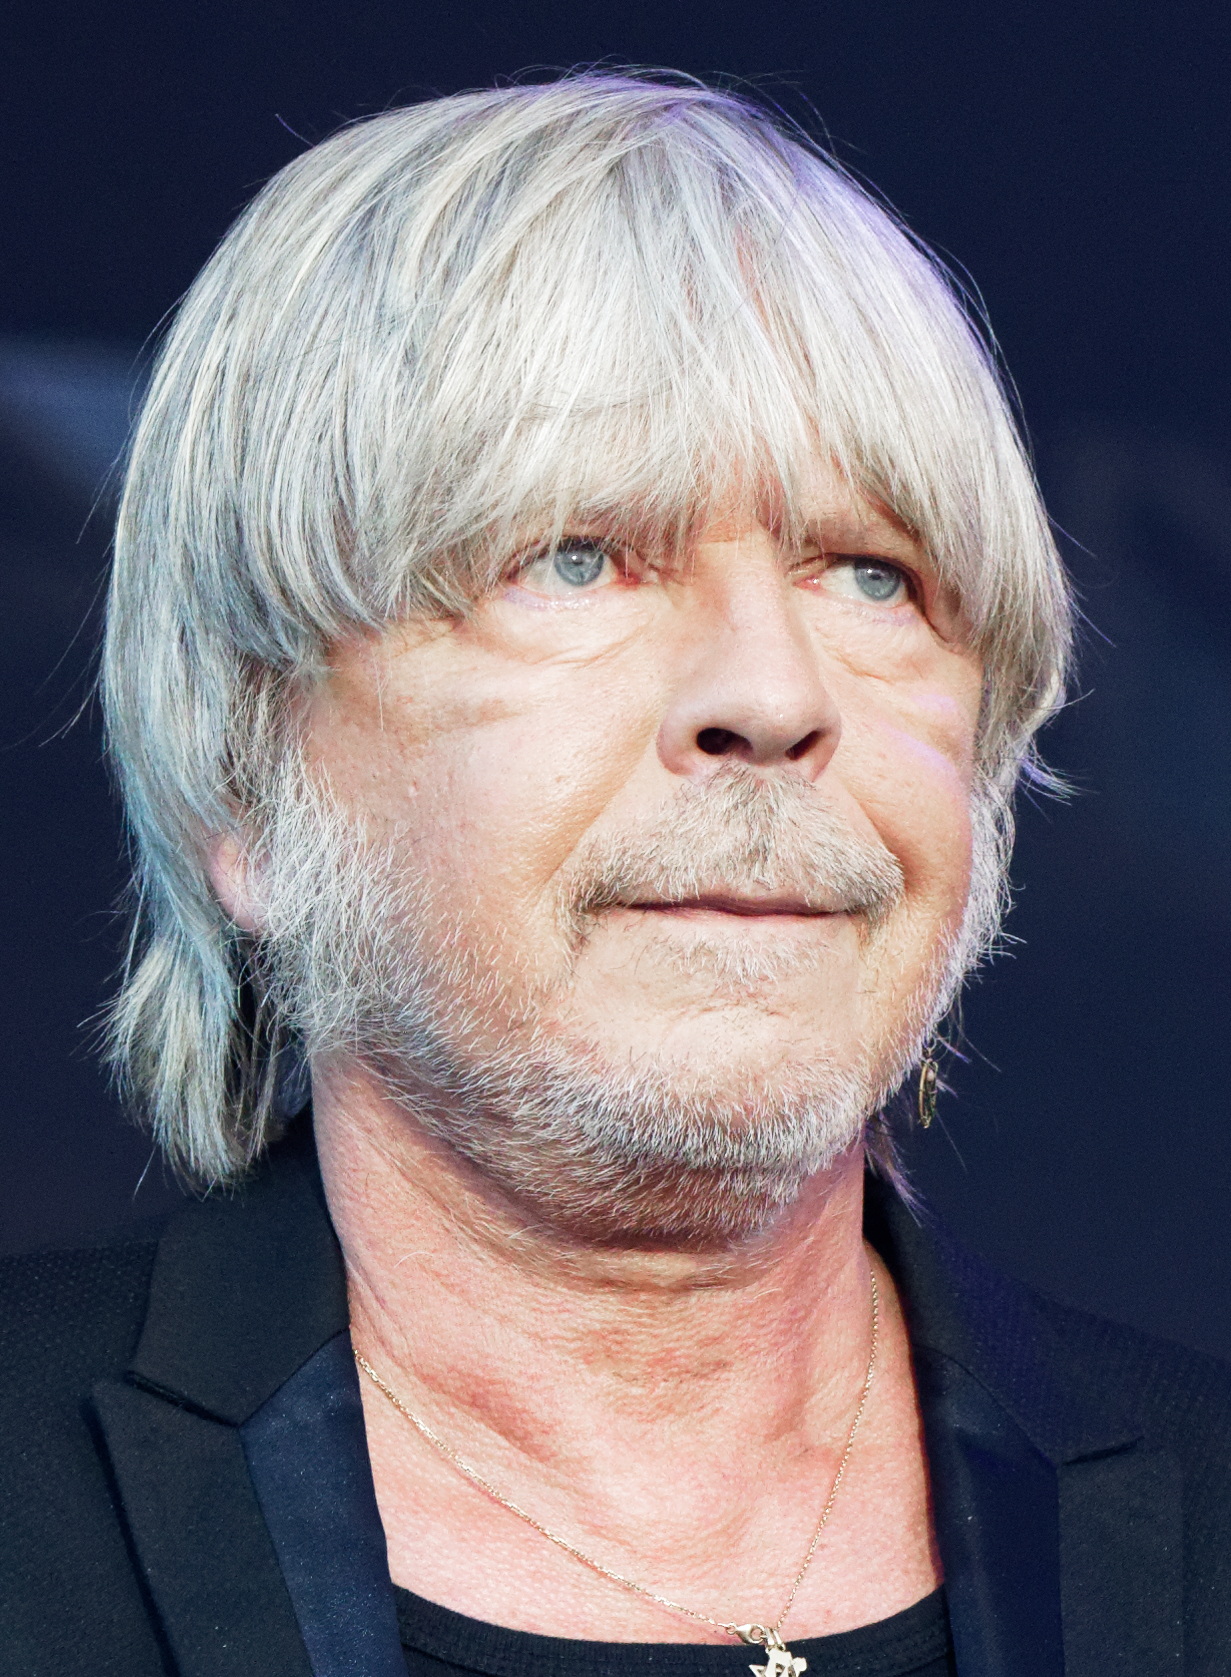 Renaud Wikipedia Born 11 may 1952), is a popular french singer, songwriter and actor. renaud wikipedia